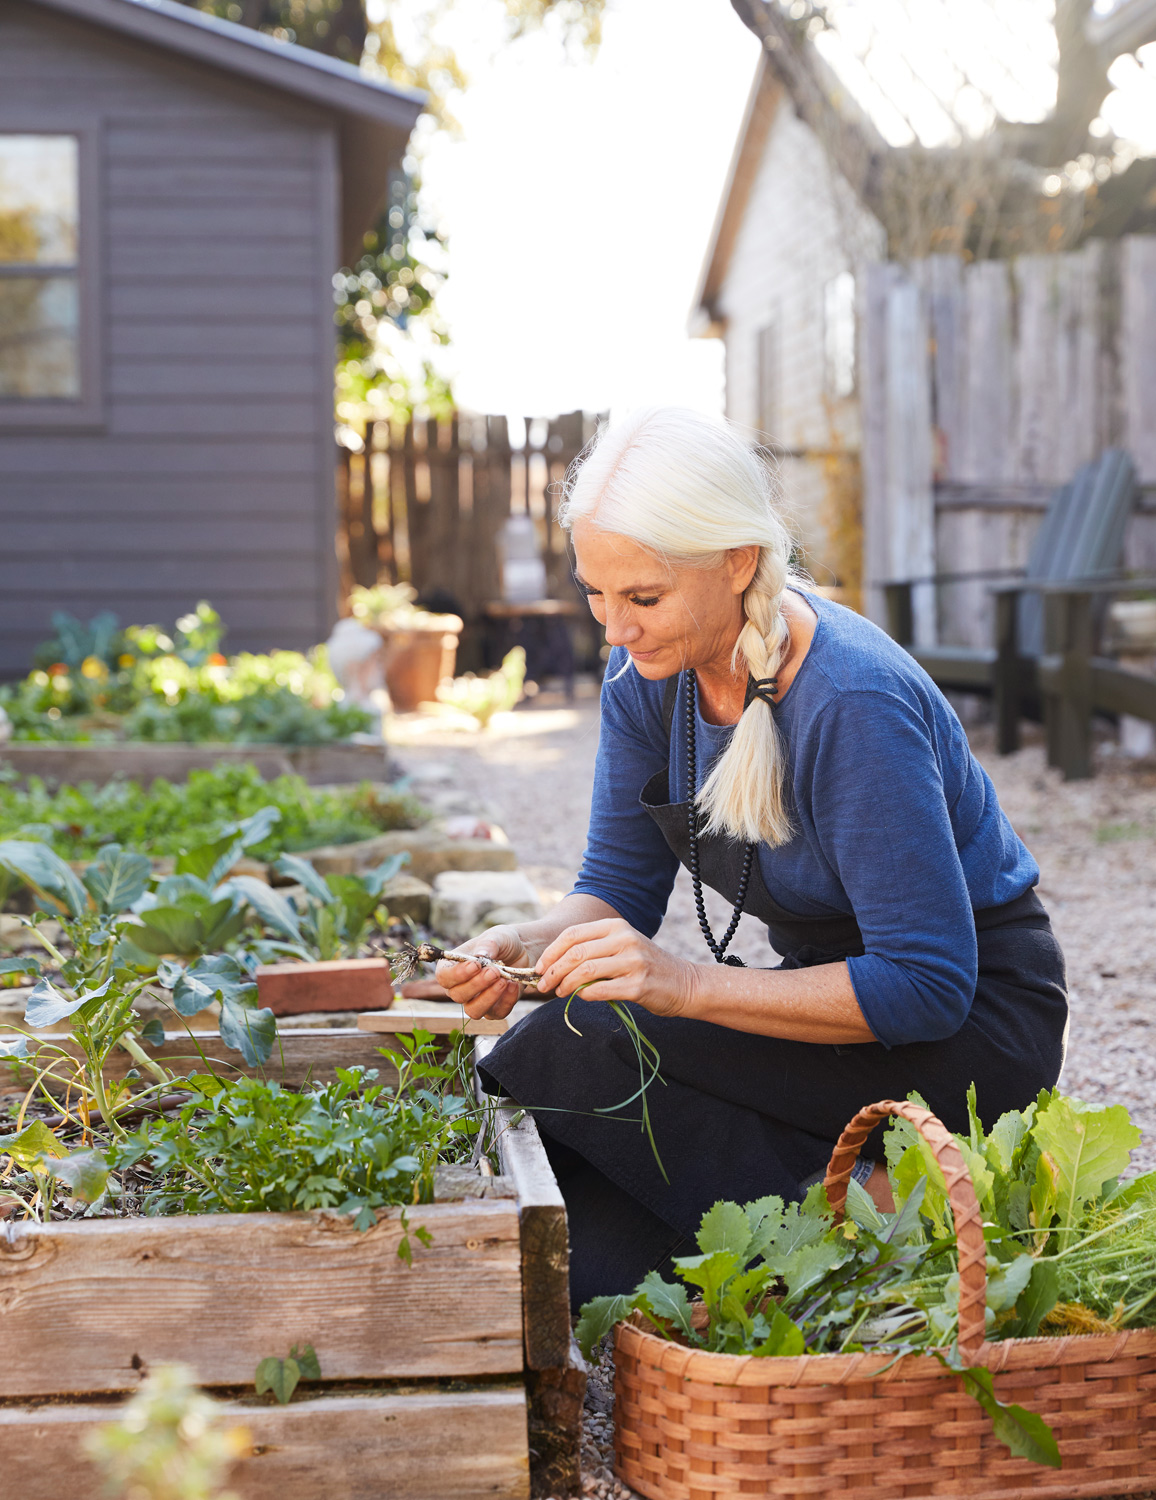 Older woman gardening by lifestyle photographer Buff Strickland